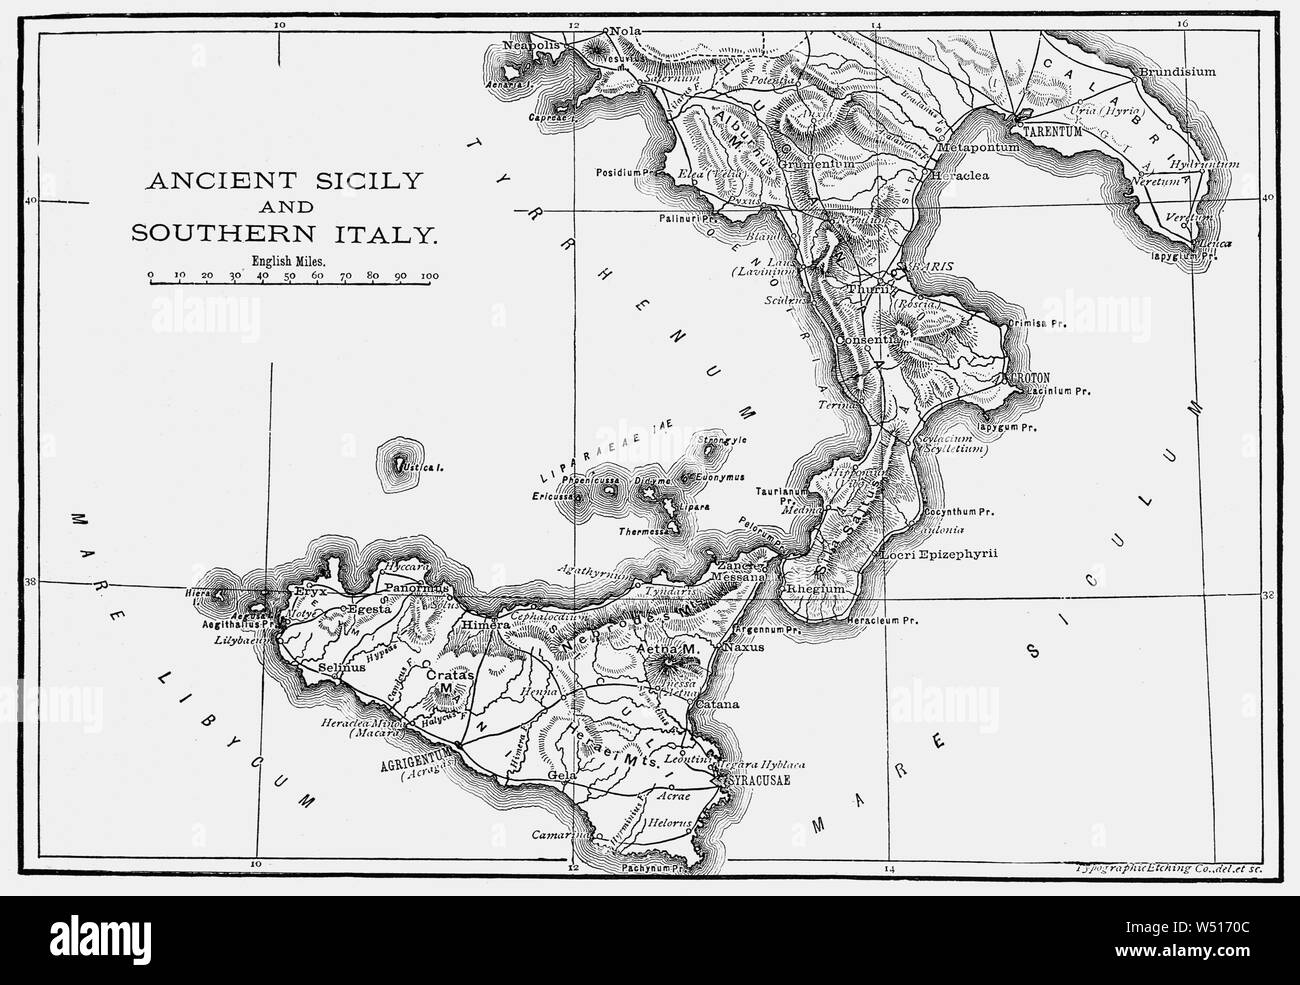 A 19th Century map of Ancient Sicily and Southern Italia (Latin and Italian name for the Italian Peninsula), illustrating the homeland of the Romans and metropole of Rome's empire in classical antiquity. Rome was an Italian city-state that changed its form of government from kingdom to republic and when the consolidation of Italy into a single entity occurred during the Roman expansion in the peninsula, when Rome formed a permanent association with most of the local tribes and cities. Stock Photo